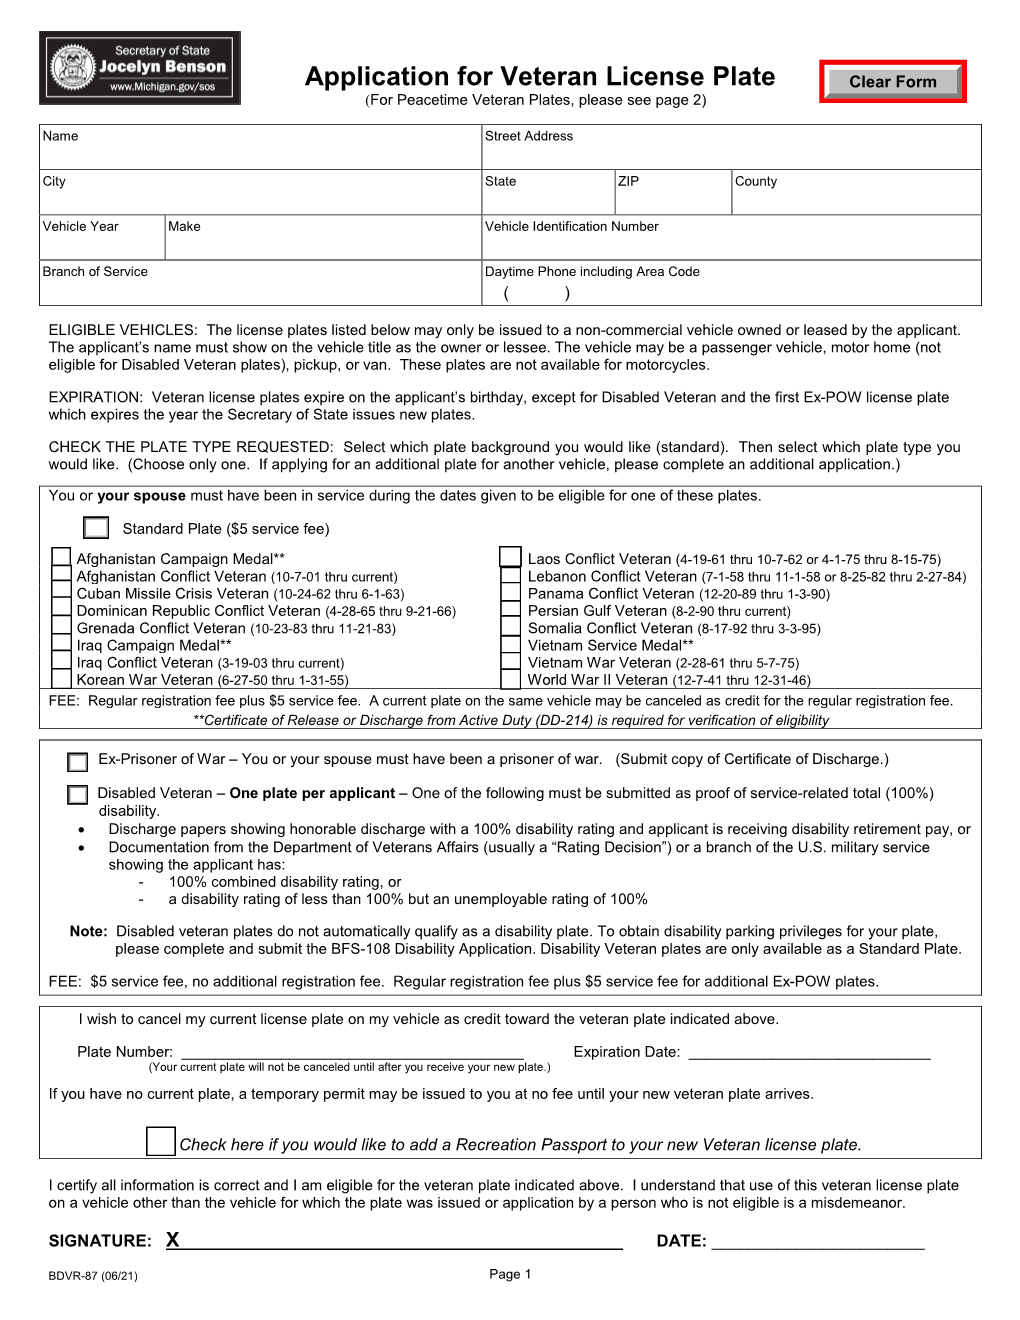 Application for Veteran License Plate (For Peacetime Veteran Plates, Please See Page 2)